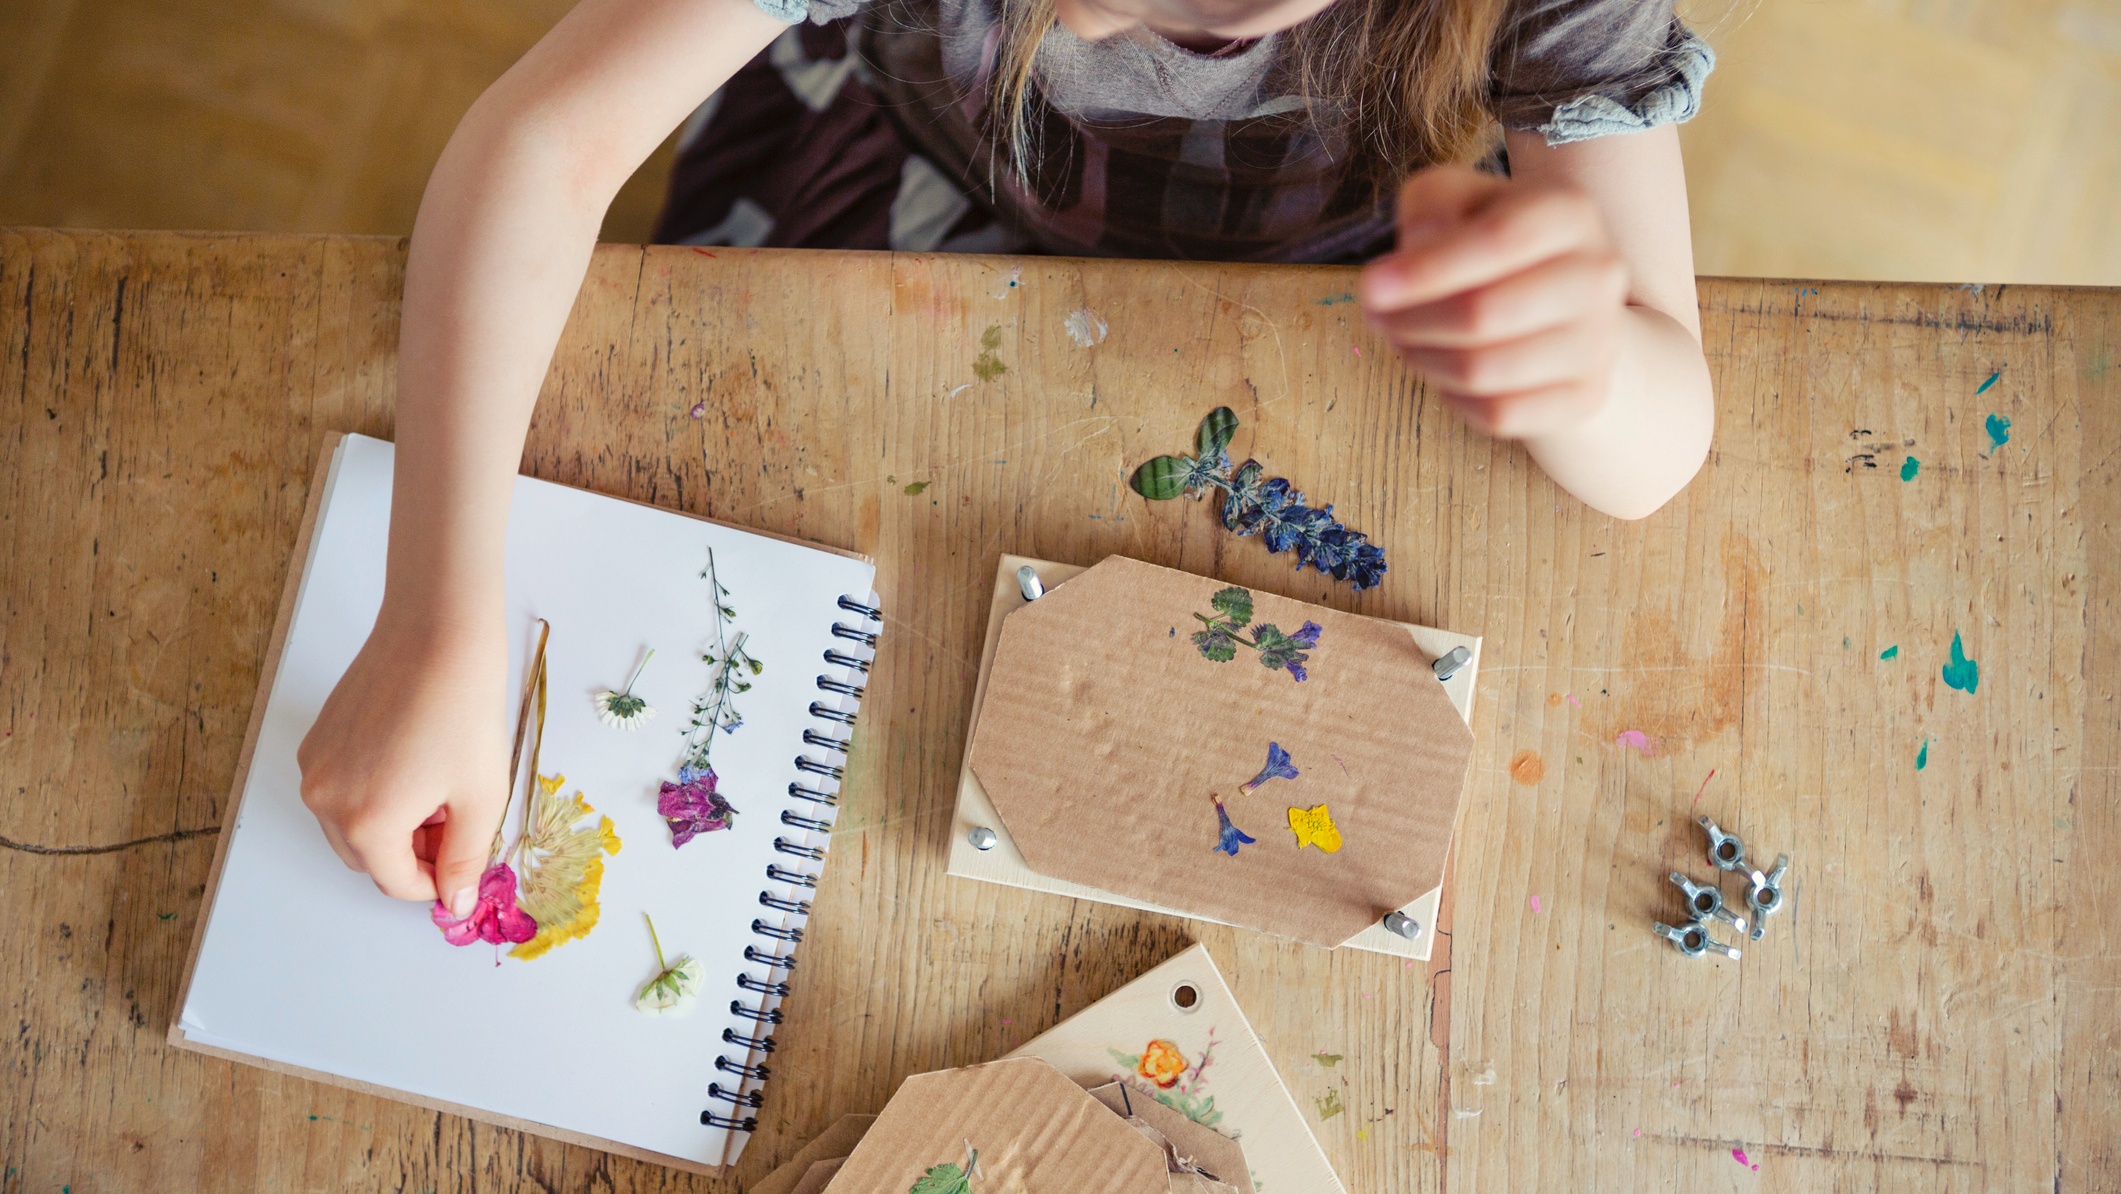 Young girl creating a scrapbook using flower cuttings at a wooden table at home.